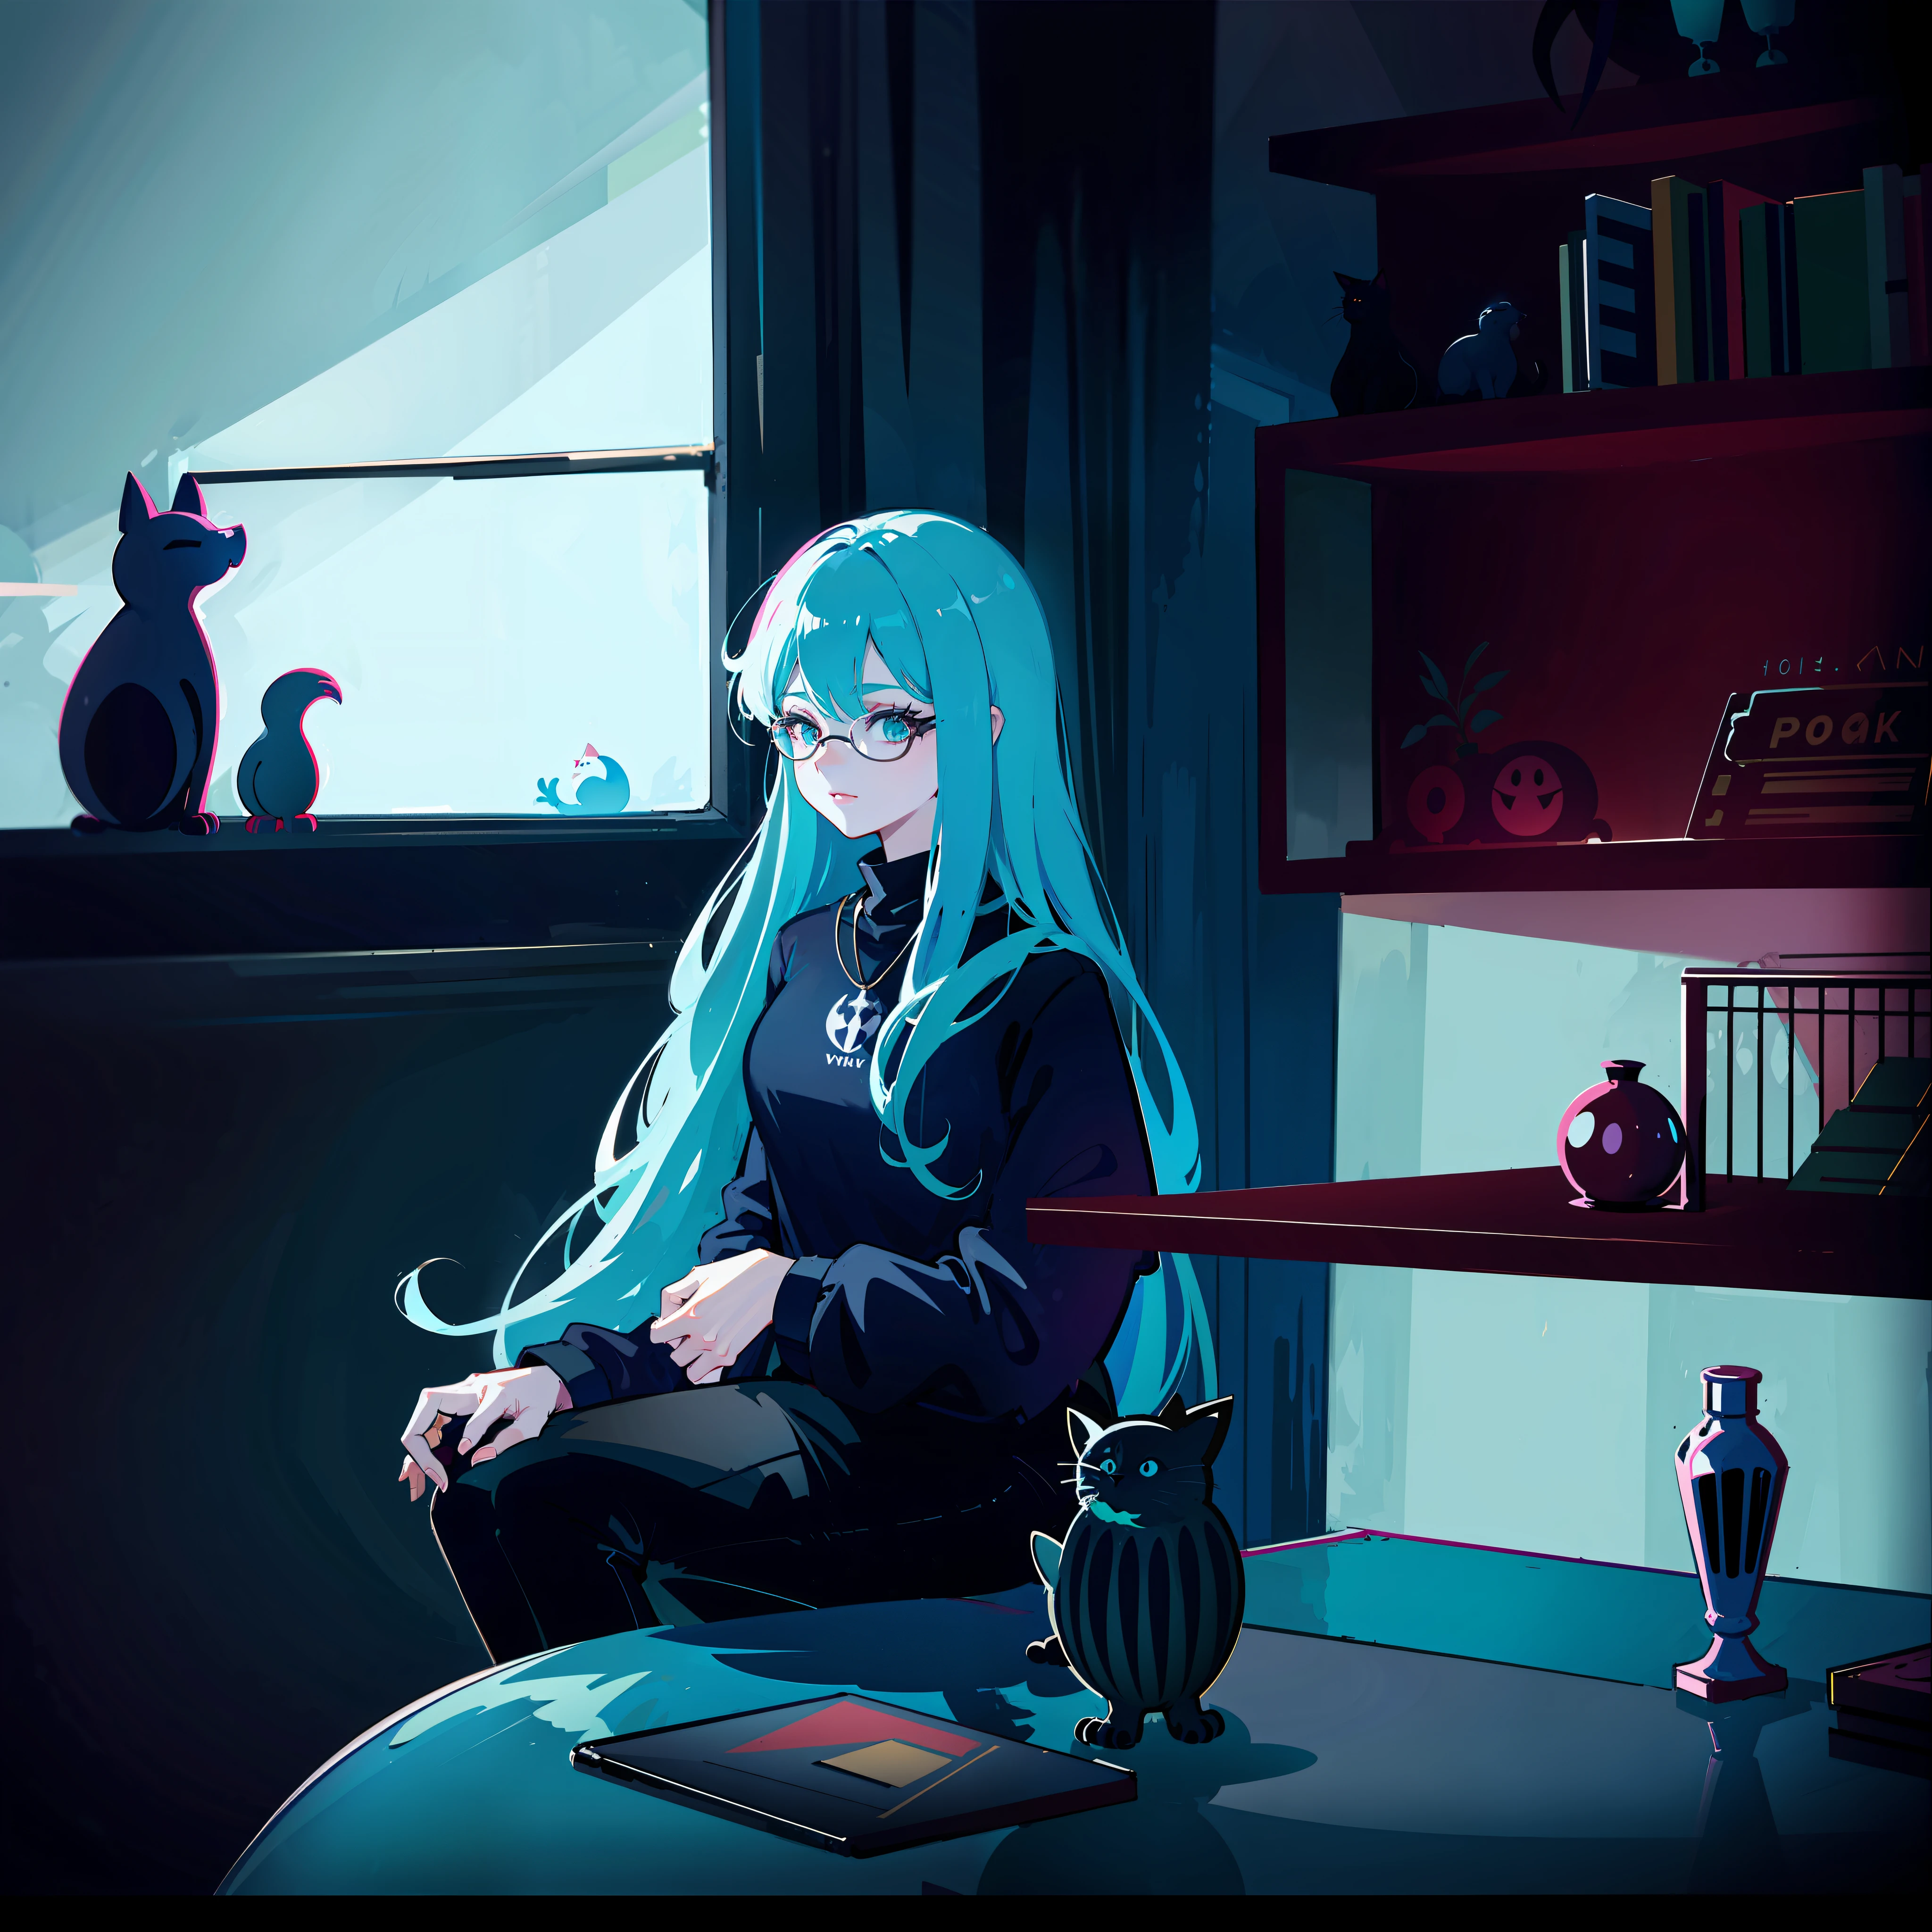 witch sitting in a chair in a dark room with a cat, witchy, witch girl, witch academia, calm night. digital illustration, cat witch, jen bartel, lo-fi illustration style, witch, digital 2d illustration, 2d digital illustration, 2d illustration, 2 d illustration, digital fantasy illustration, dreamy illustration, procreate illustration